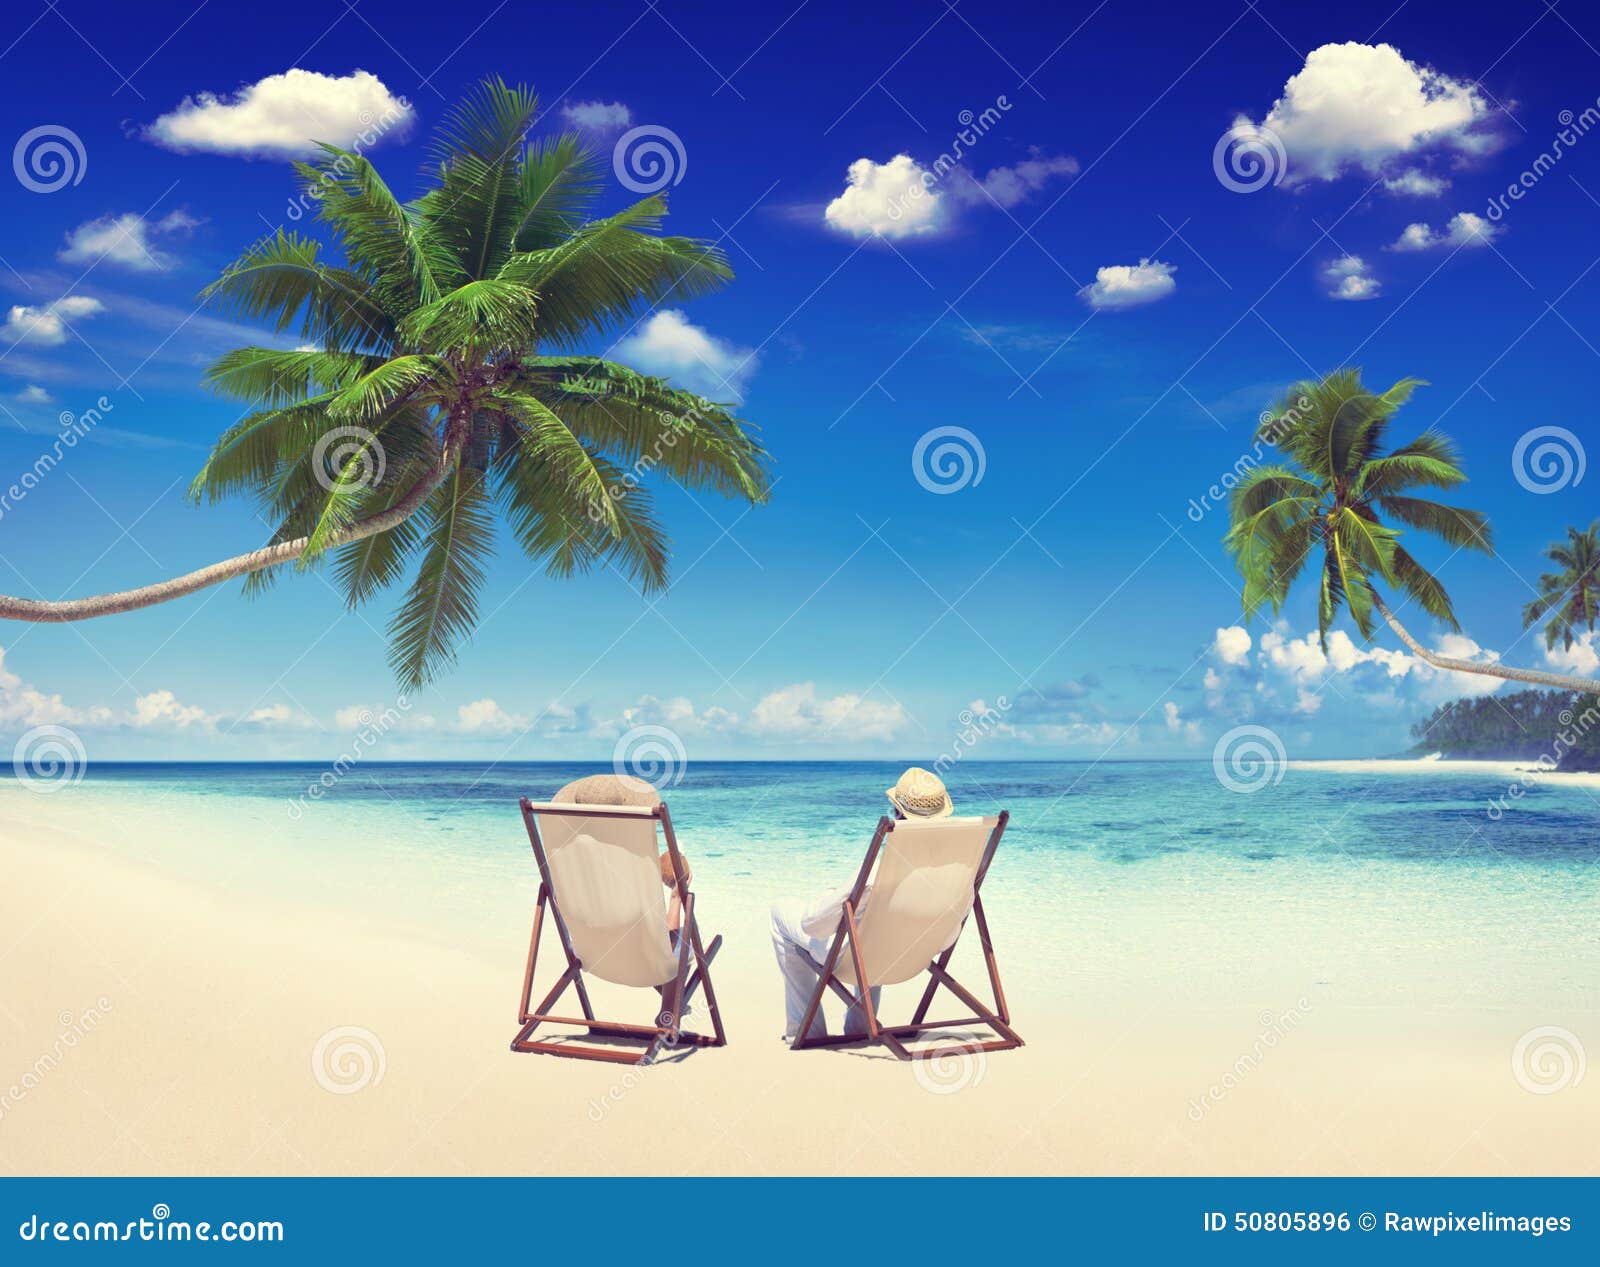 couple relaxation vacation summer beach holiday concept